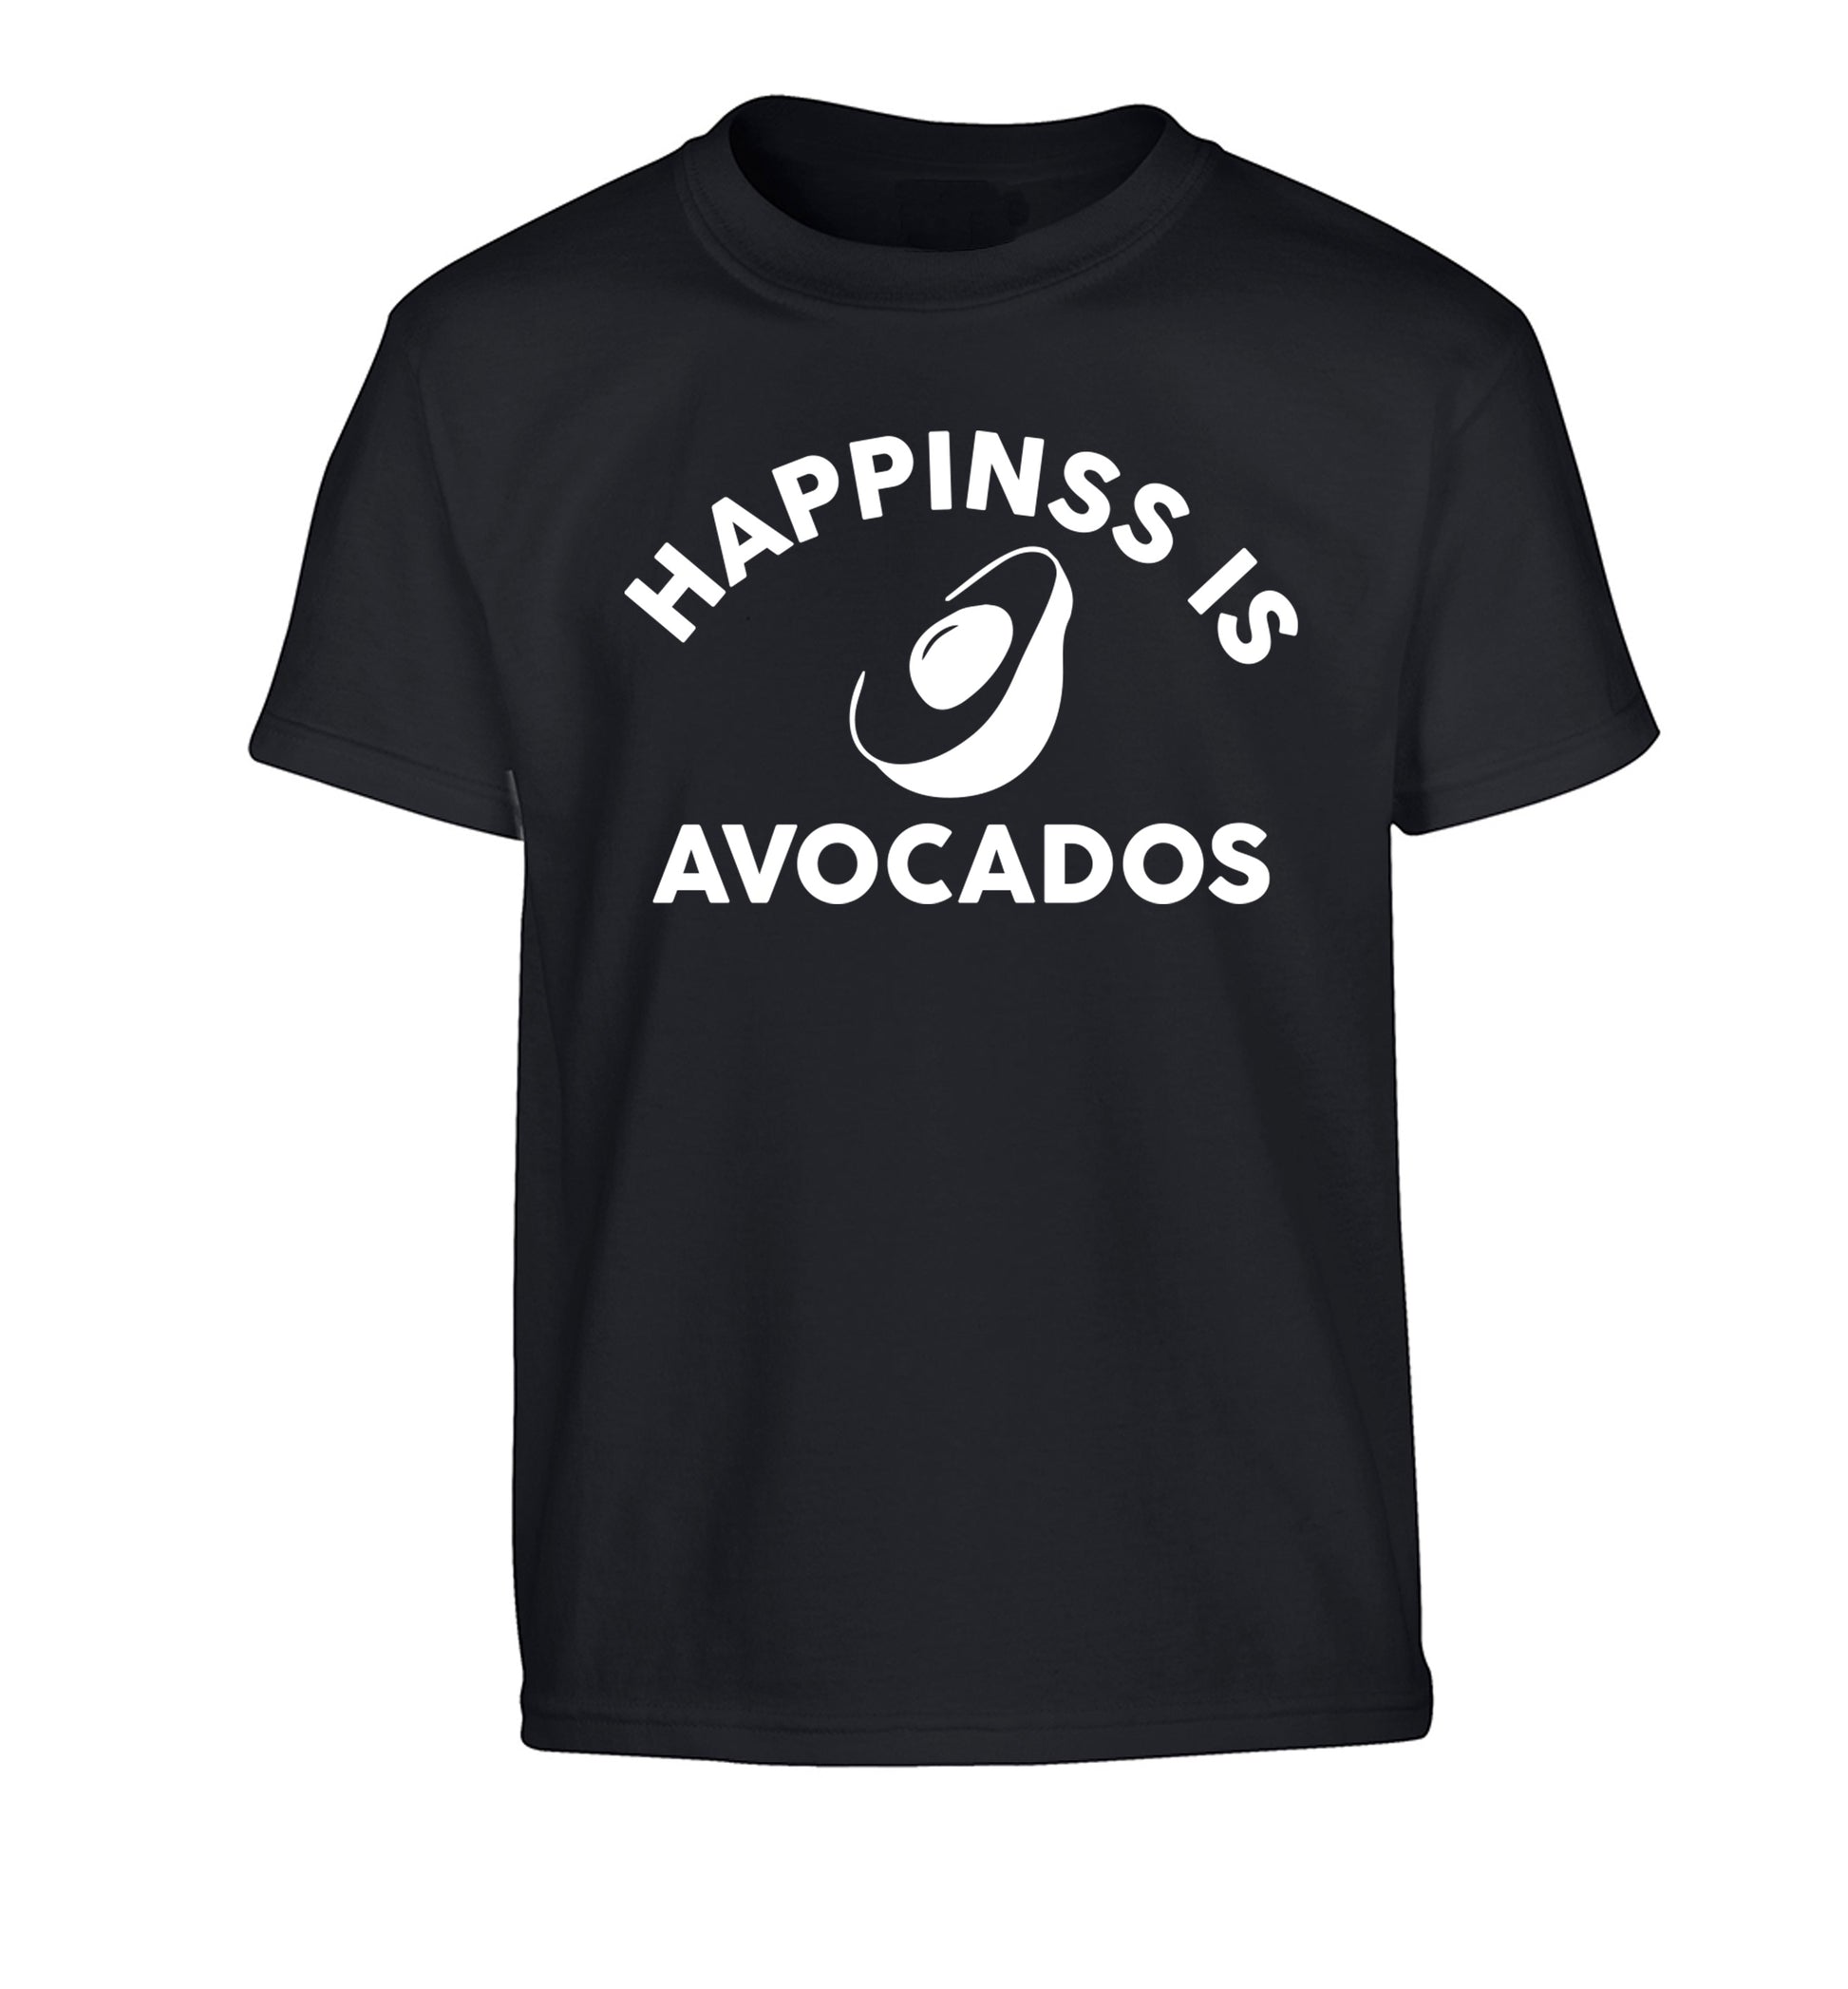 Happiness is avocados Children's black Tshirt 12-14 Years